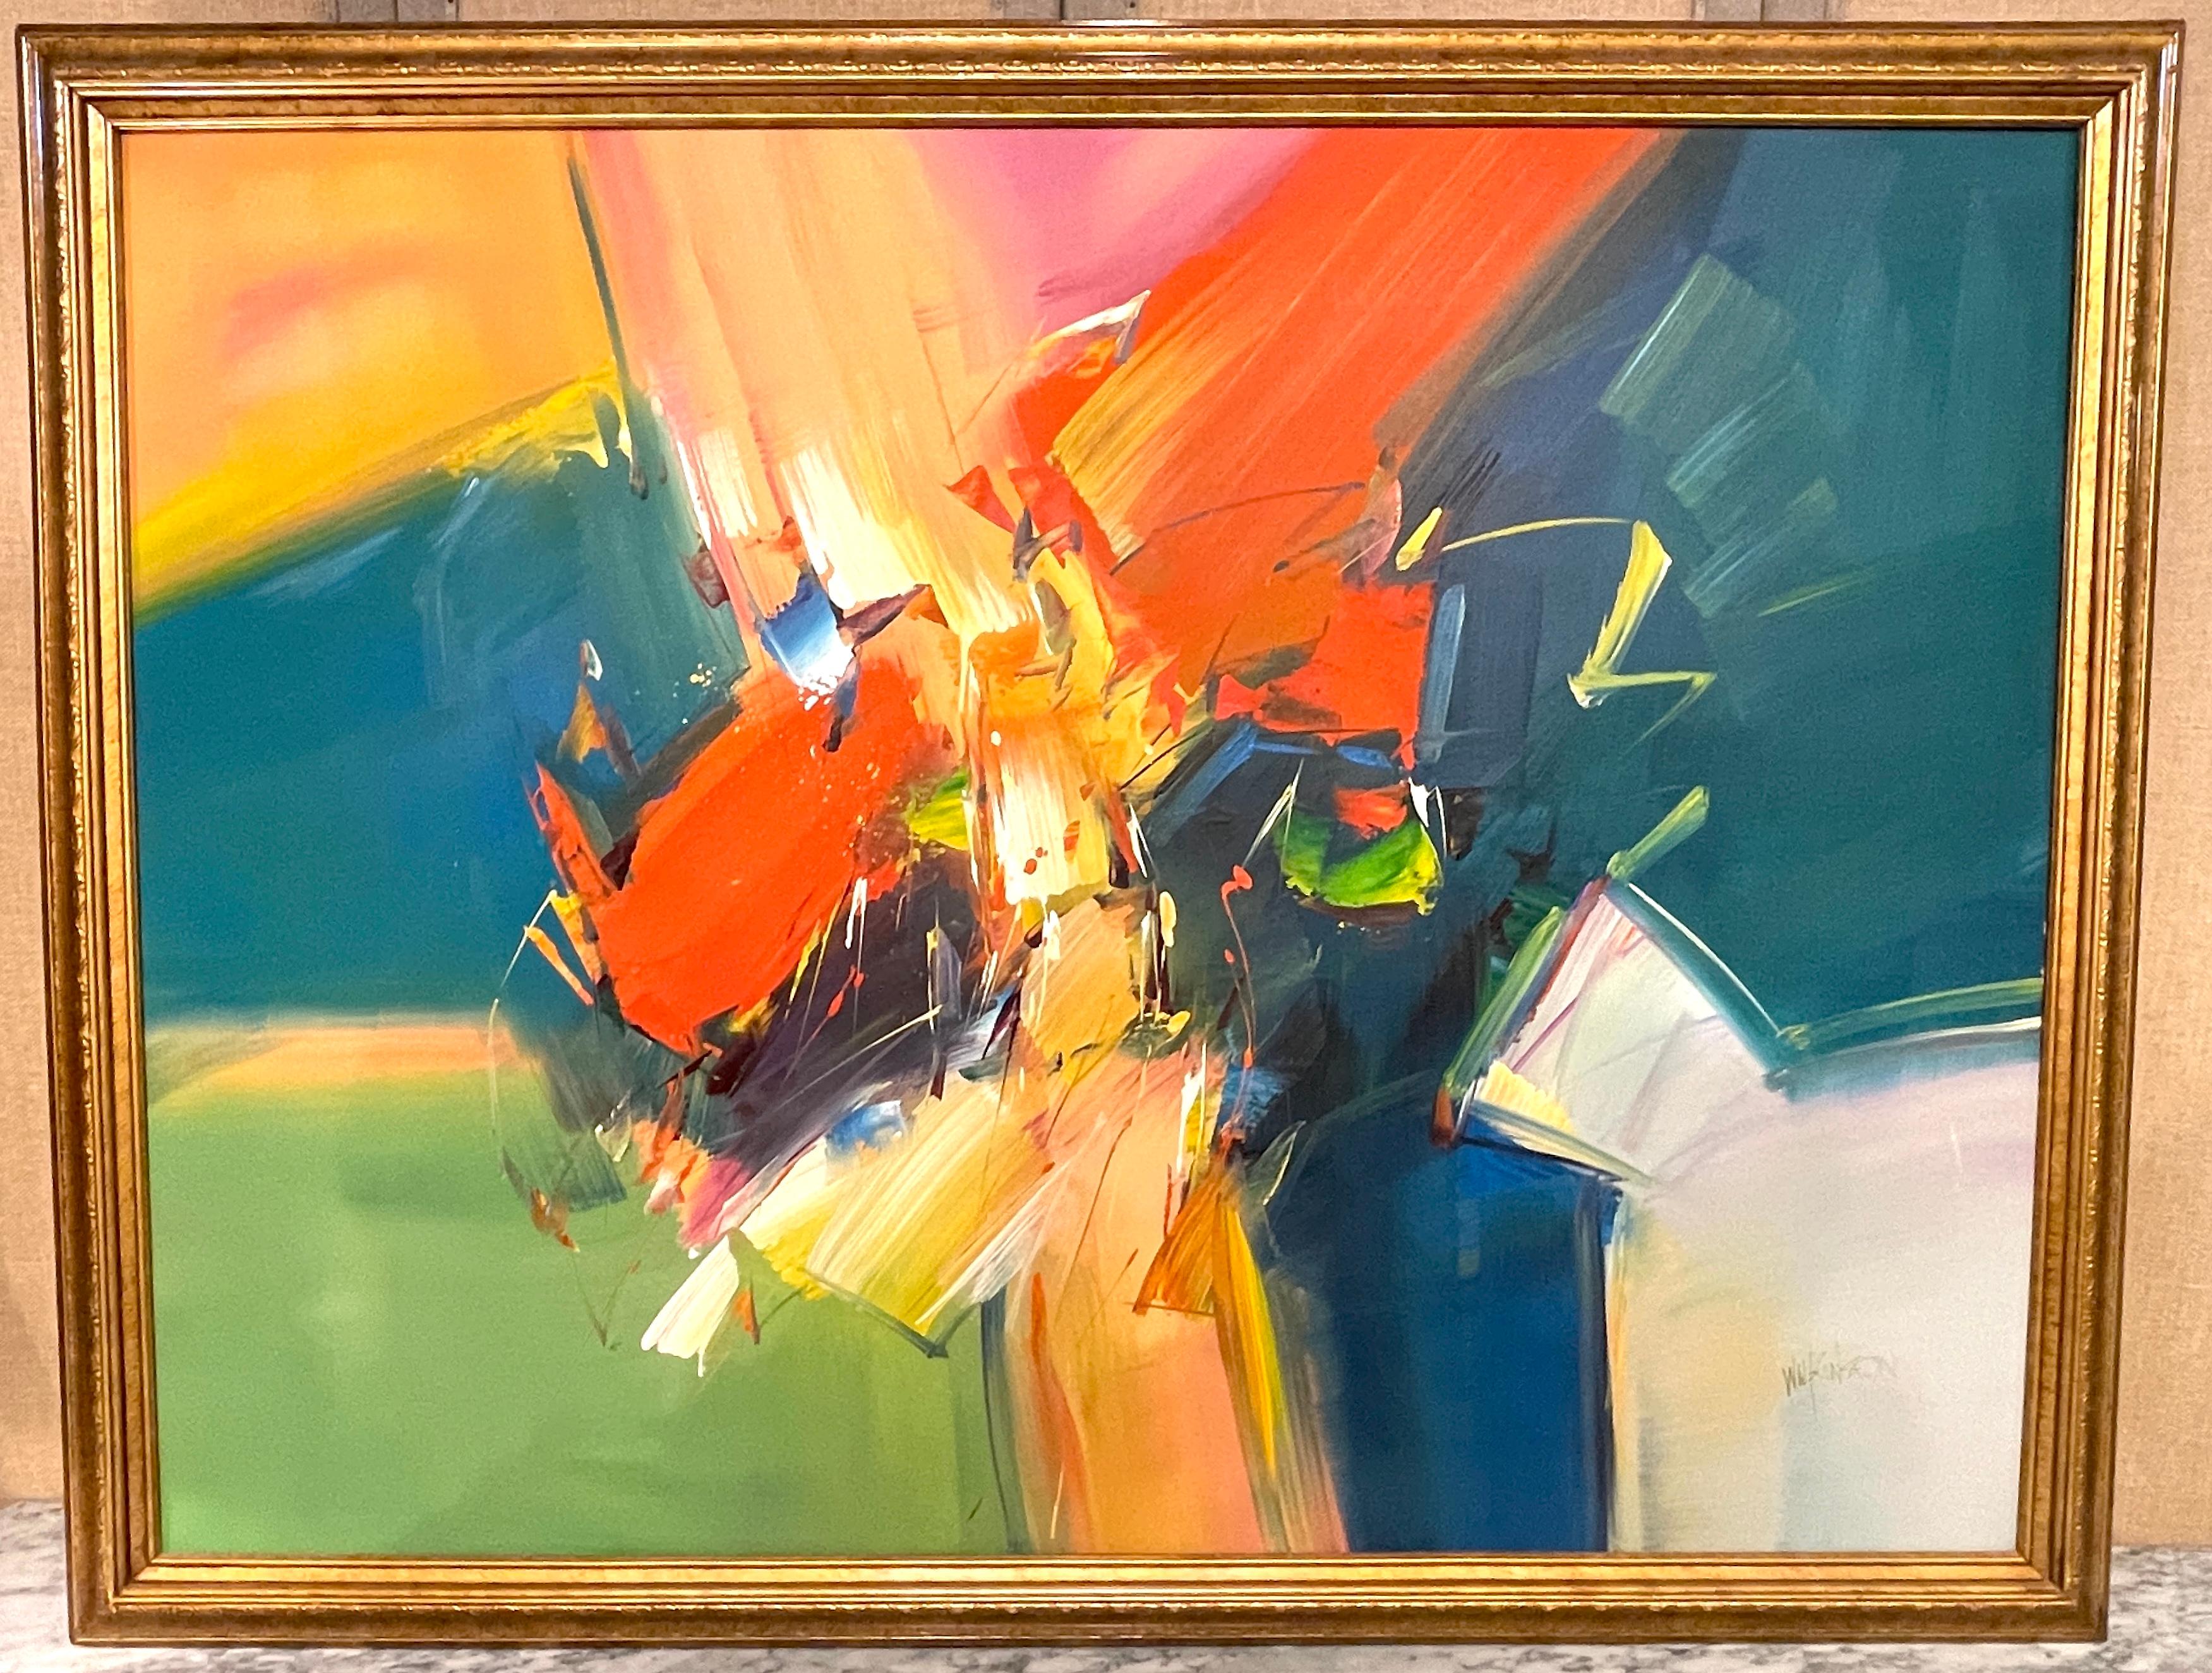 Untitled, Large Abstract by Mandy Wilkinson, British B. 1970
Mandy Wilkinson, British 1970
Oil on canvas, 49 inches wide by 36 inches high
Giltwood Frame: 53 inches wide, 41 inches high, and 2 inches deep

A fine example of abstract expressionism is